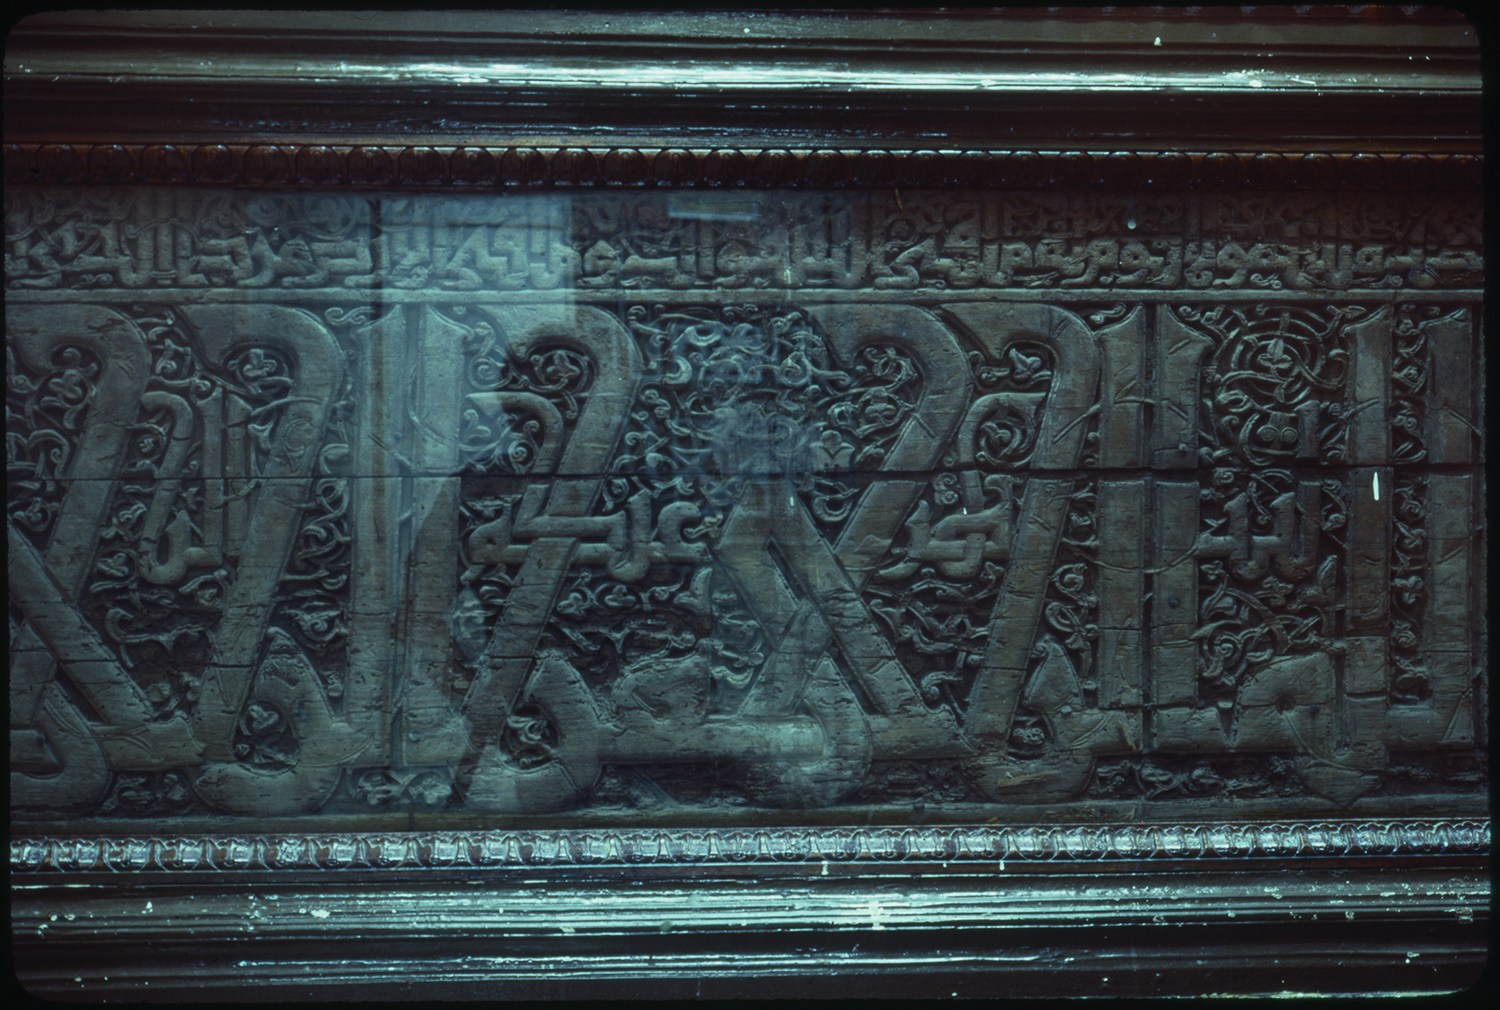 <p>Crypt of Sukayna: detail of cenotaph. </p>